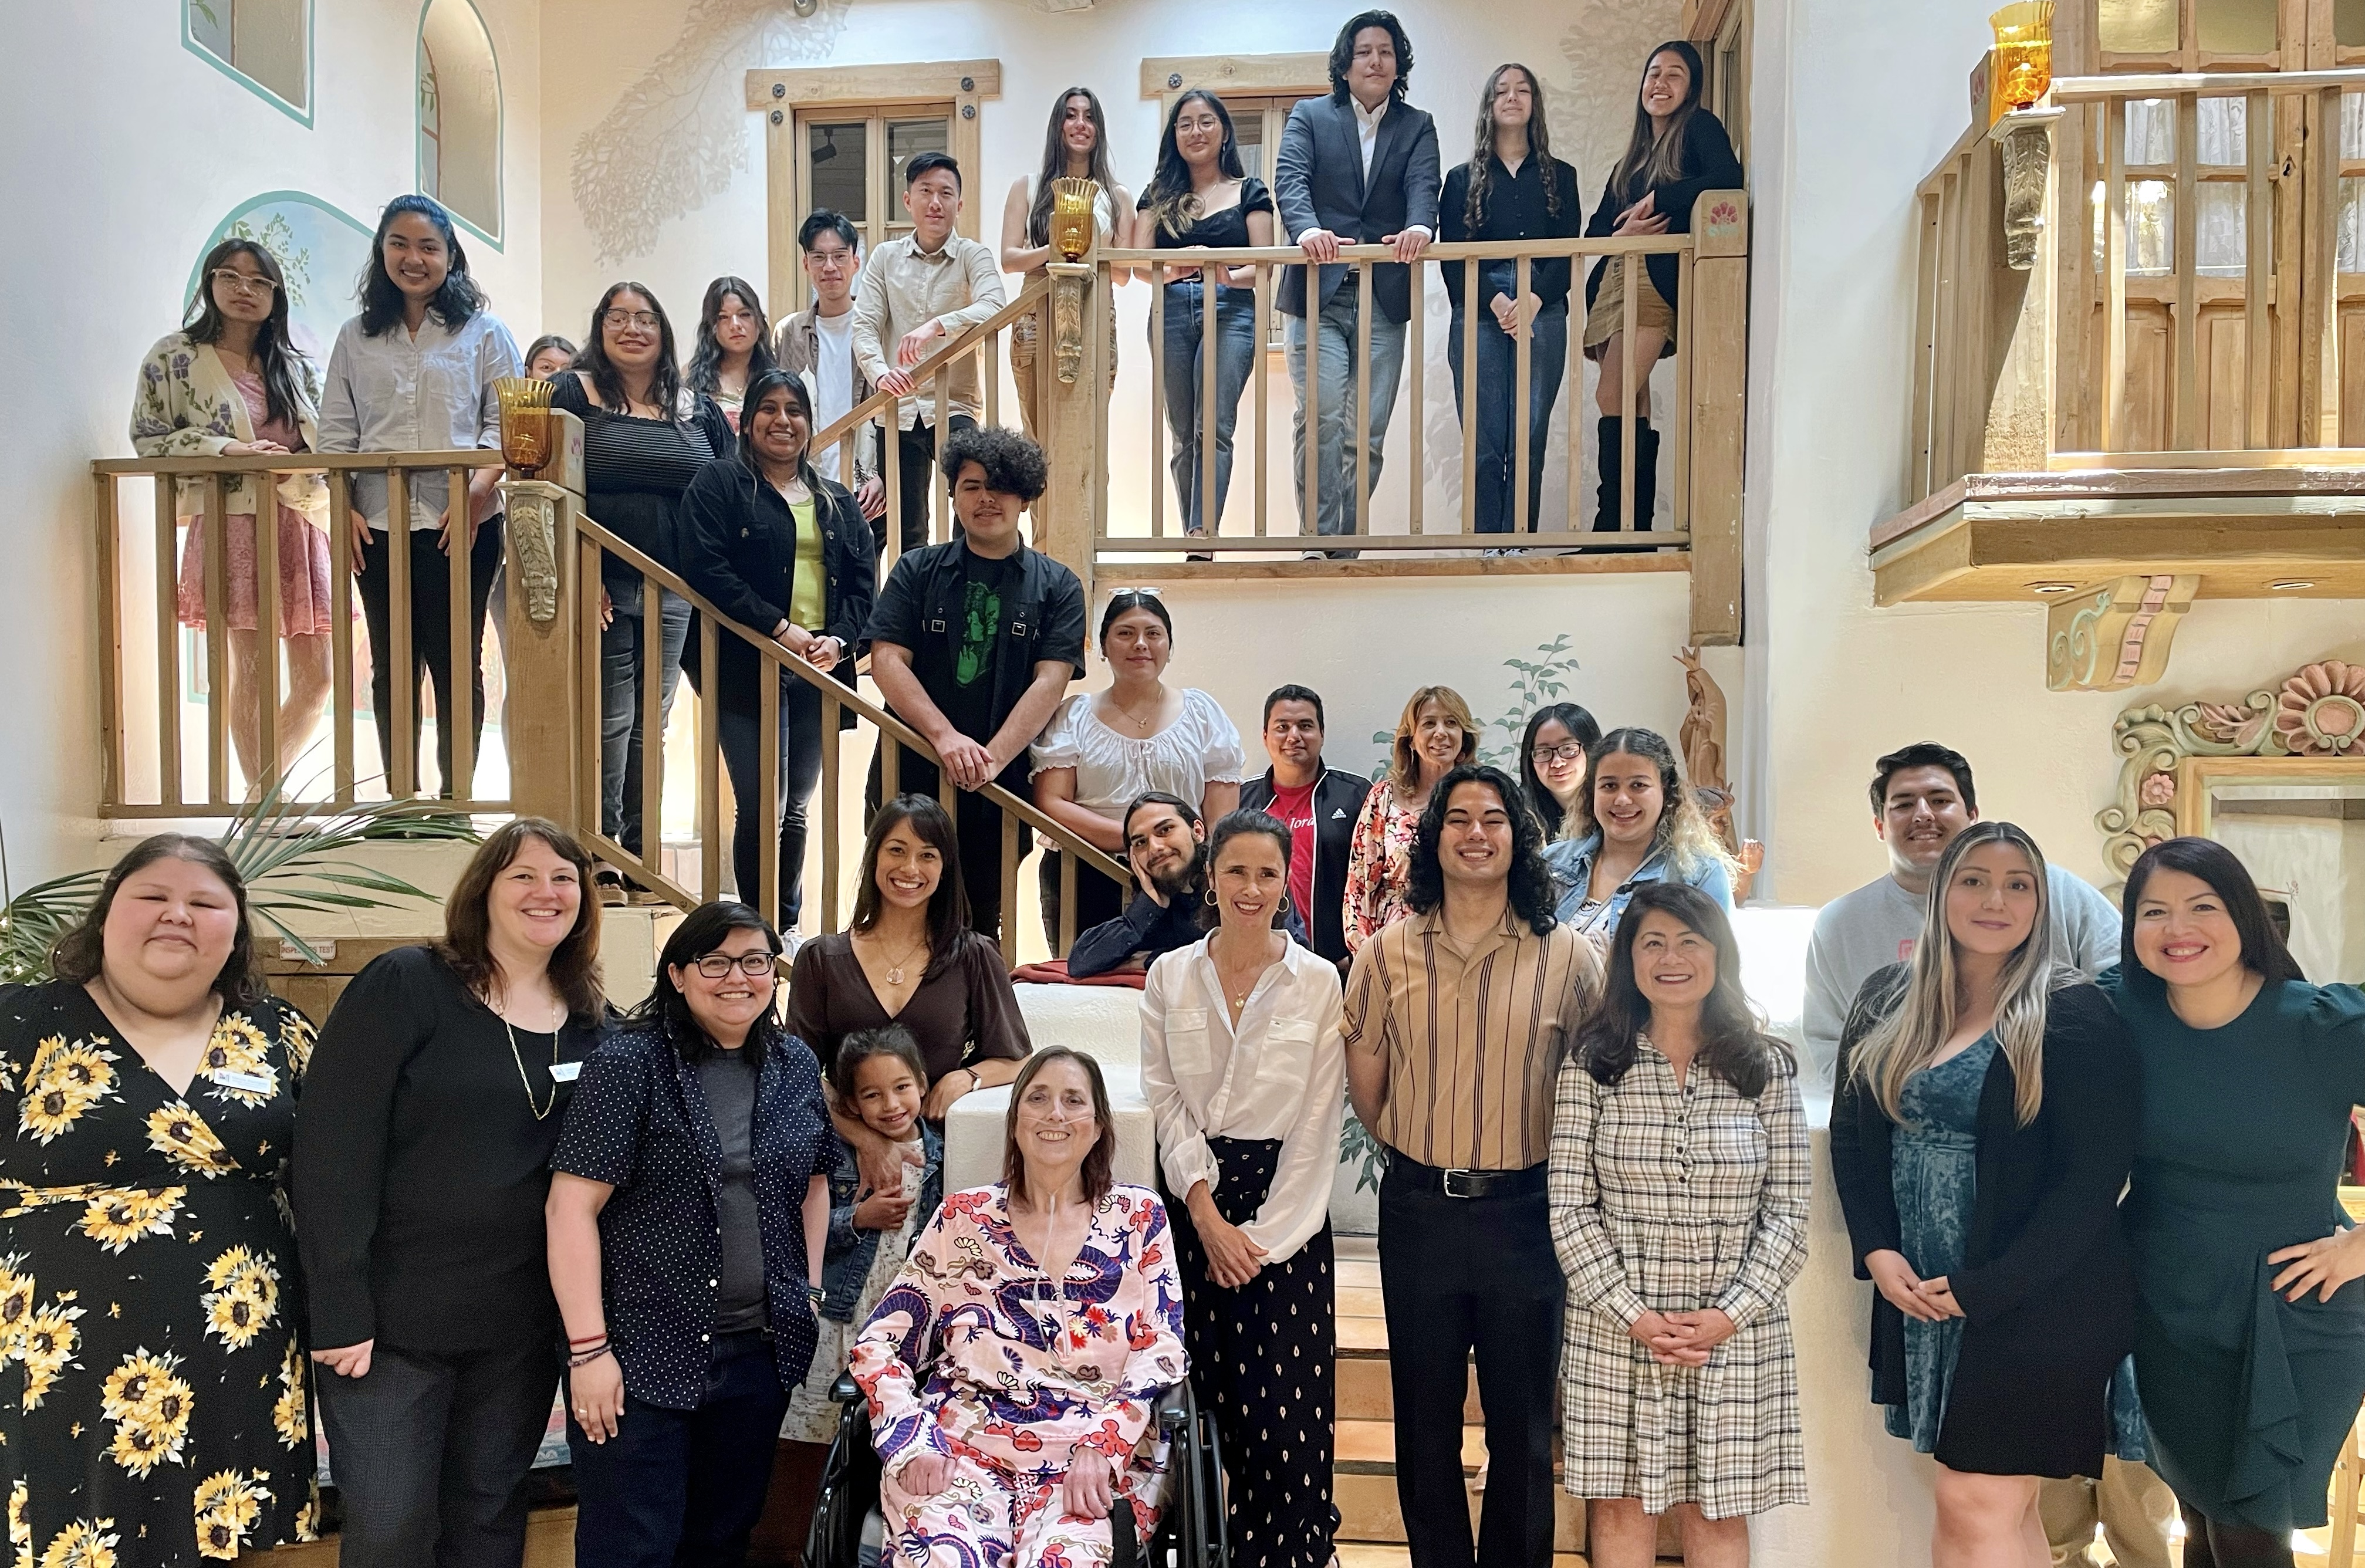 SAC ULink students pose for their Spring 2023 End of the Year Celebration at the Hacienda on a staircase and balcony setting.